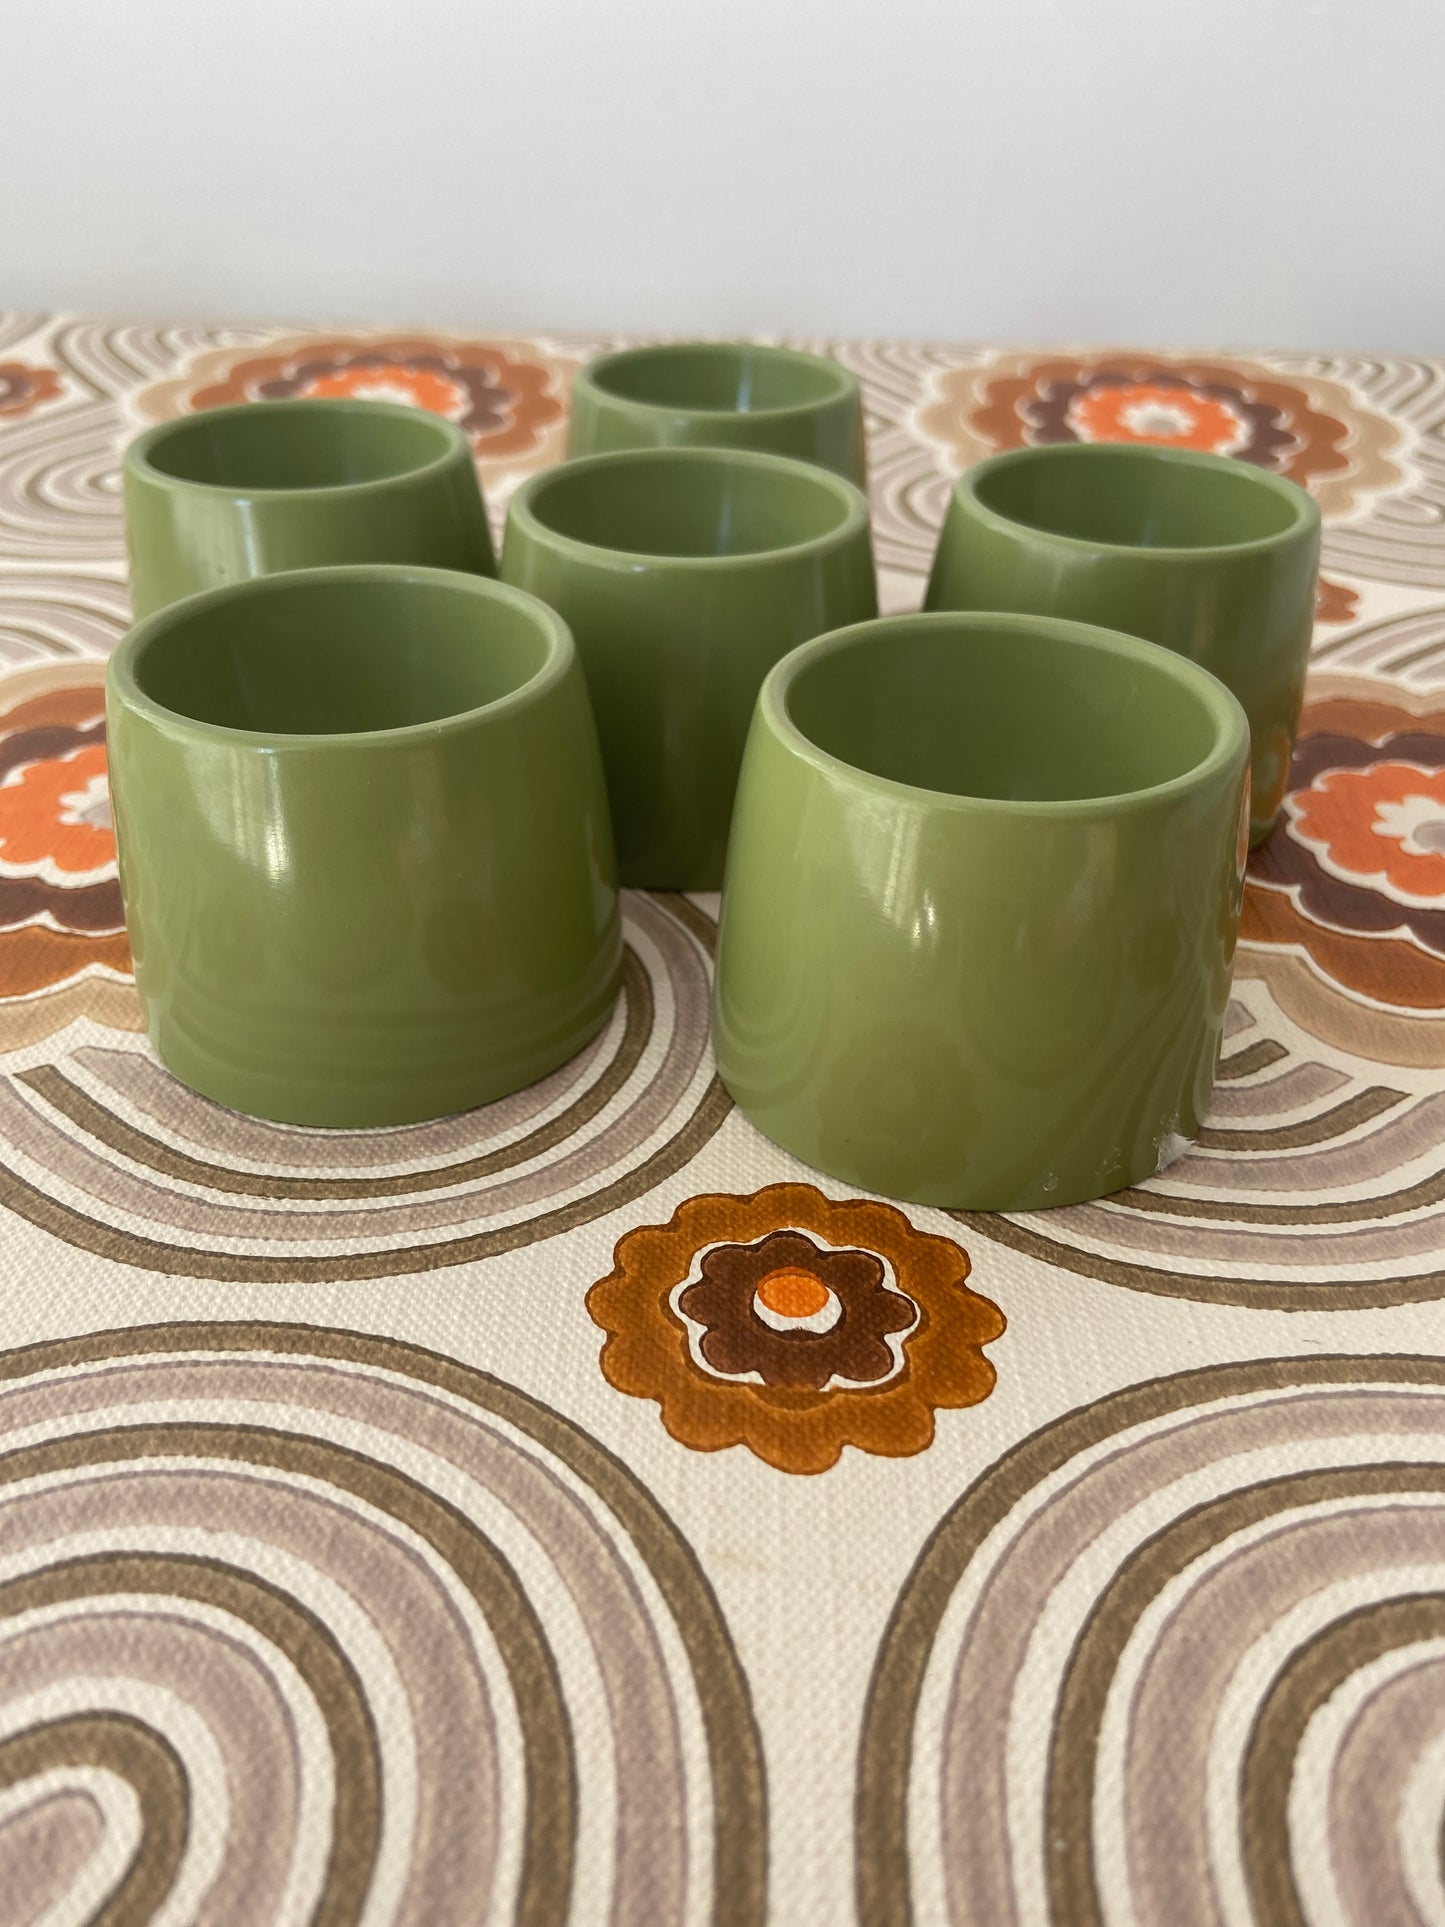 Retro 70's Egg Cups COOL Green Vintage Kitchen